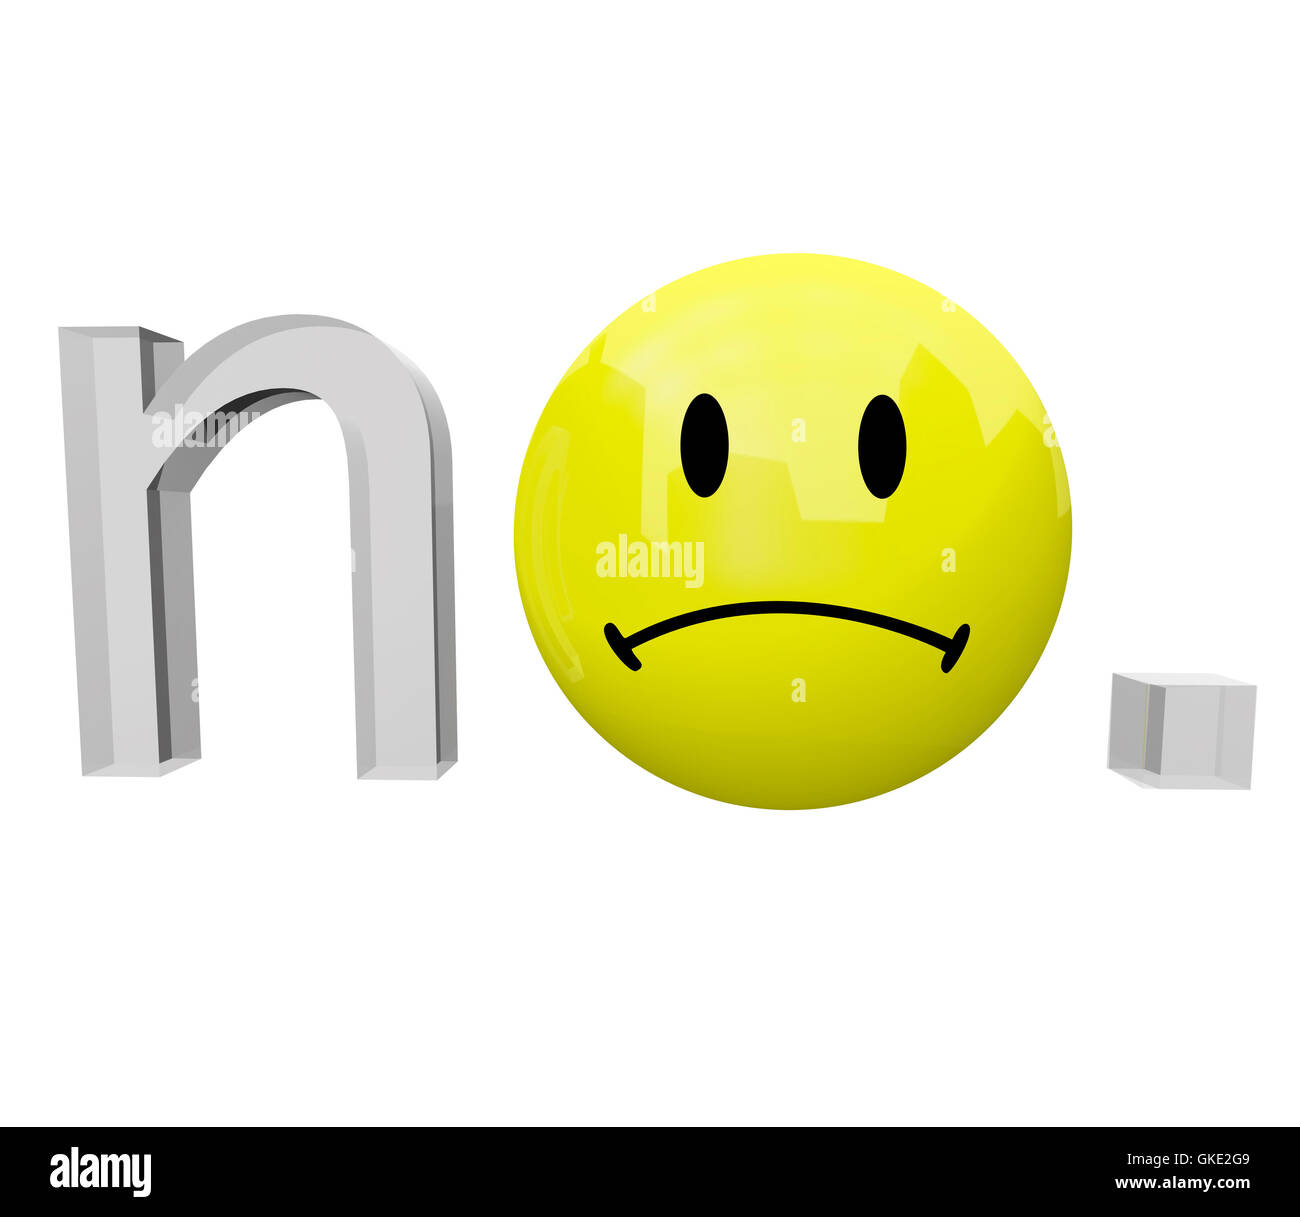 No - Yellow Frown Face Emoticon Stock Photo